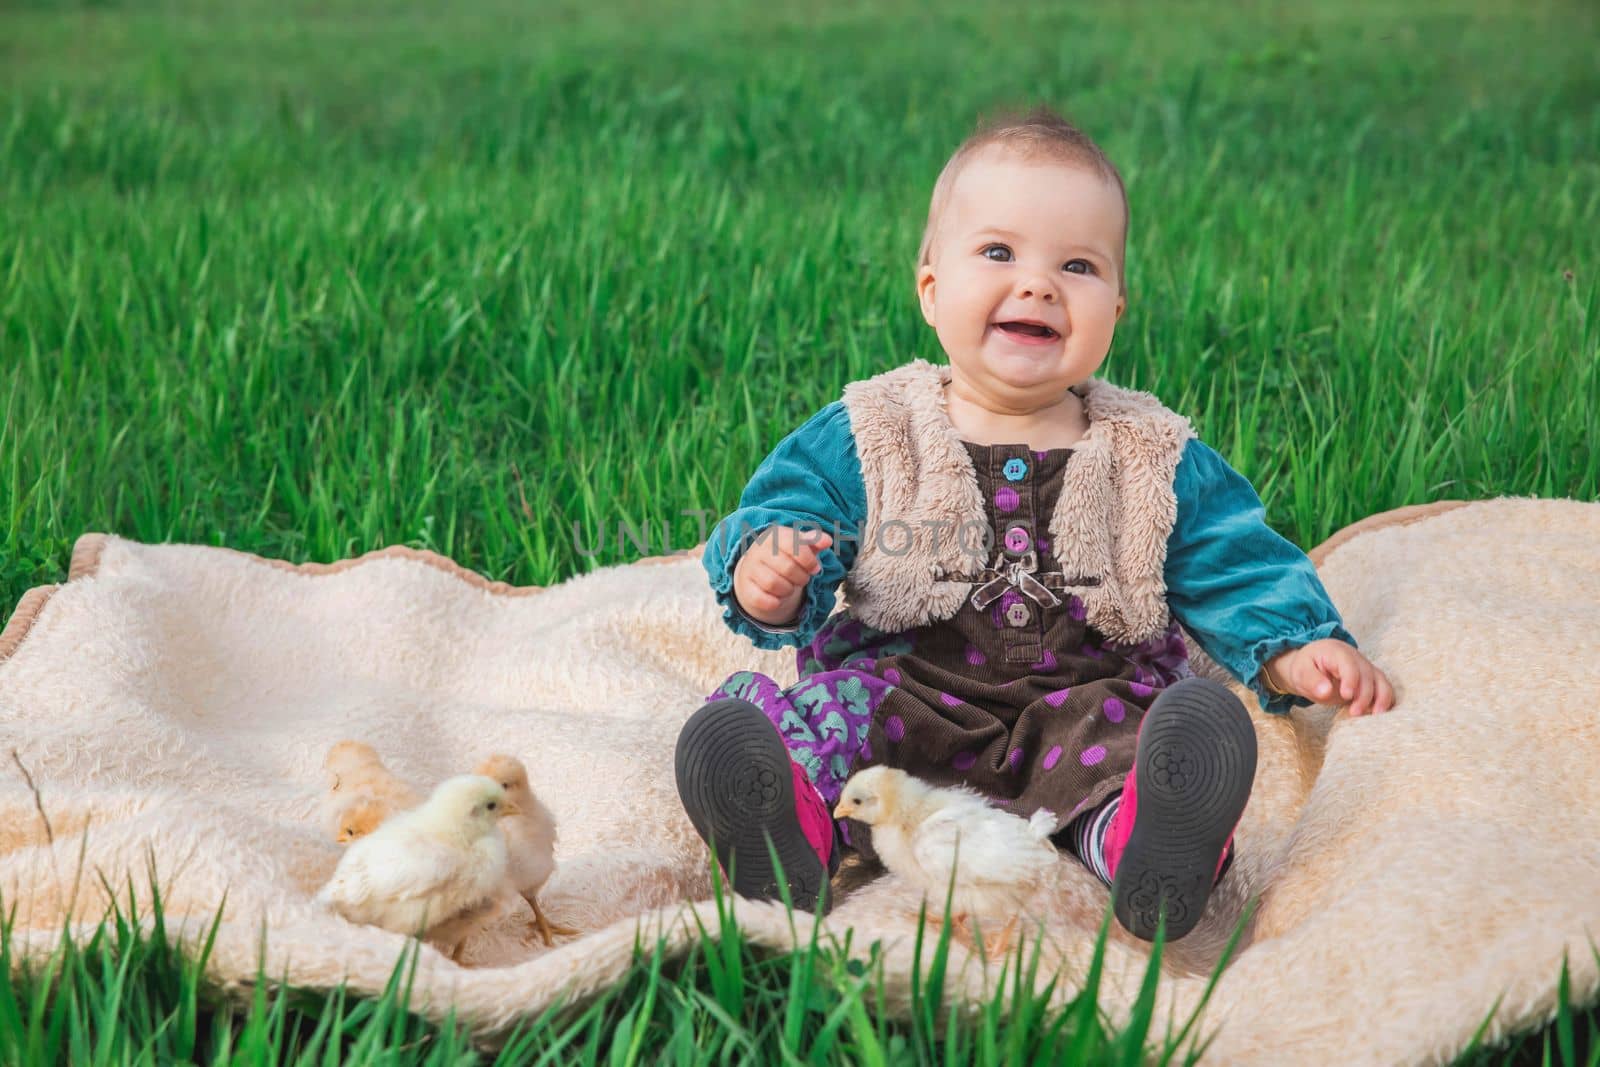 baby in a colorful dress on the lawn with chickens.